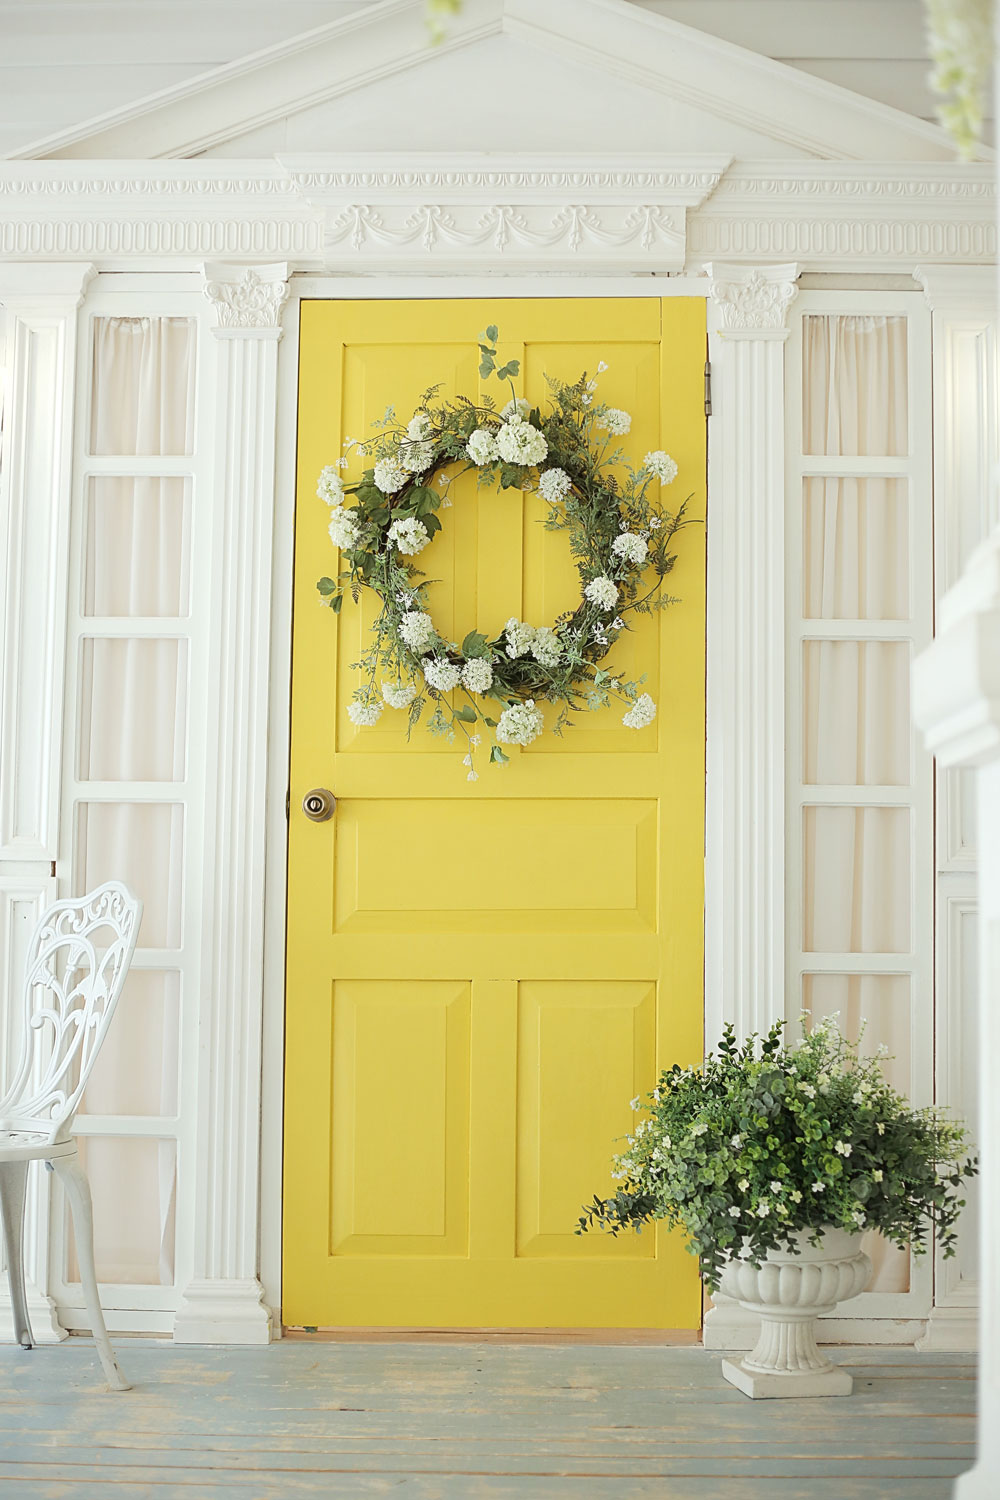 A yellow front door with a flower wreath for decoration